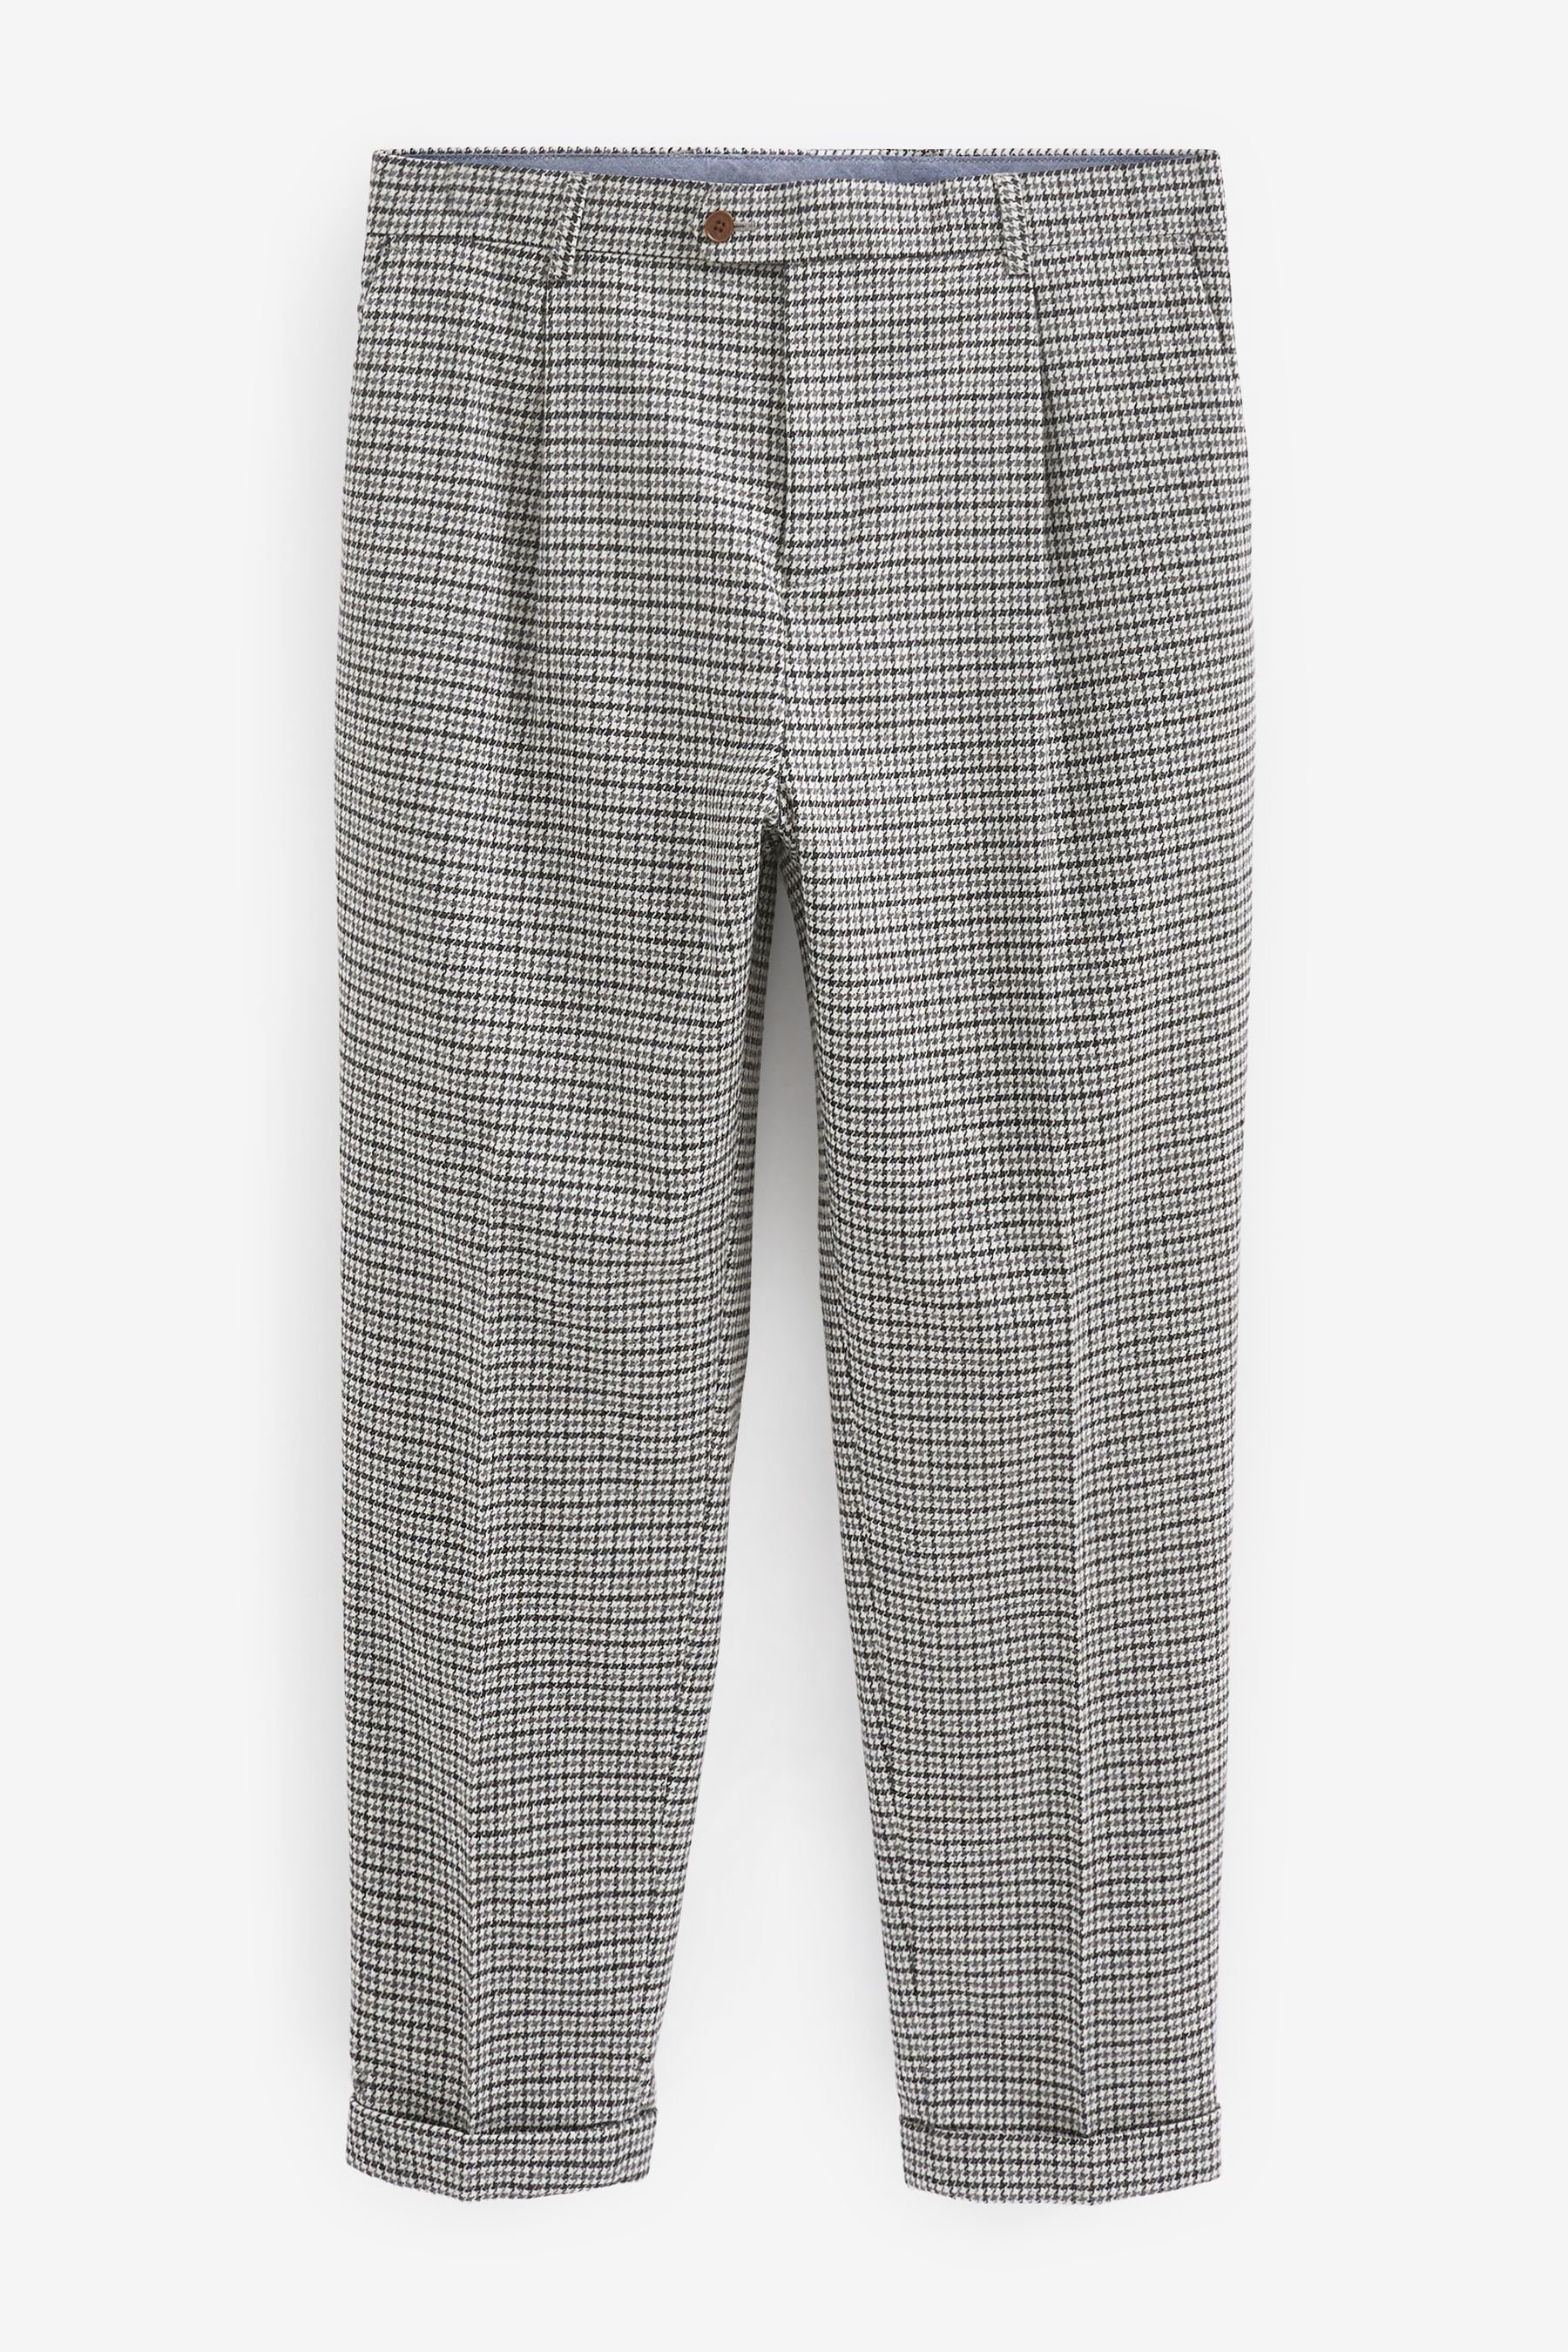 mit Hahnentrittmuster: Relaxed Grey Hose Next Fit (1-tlg) Anzughose Anzug